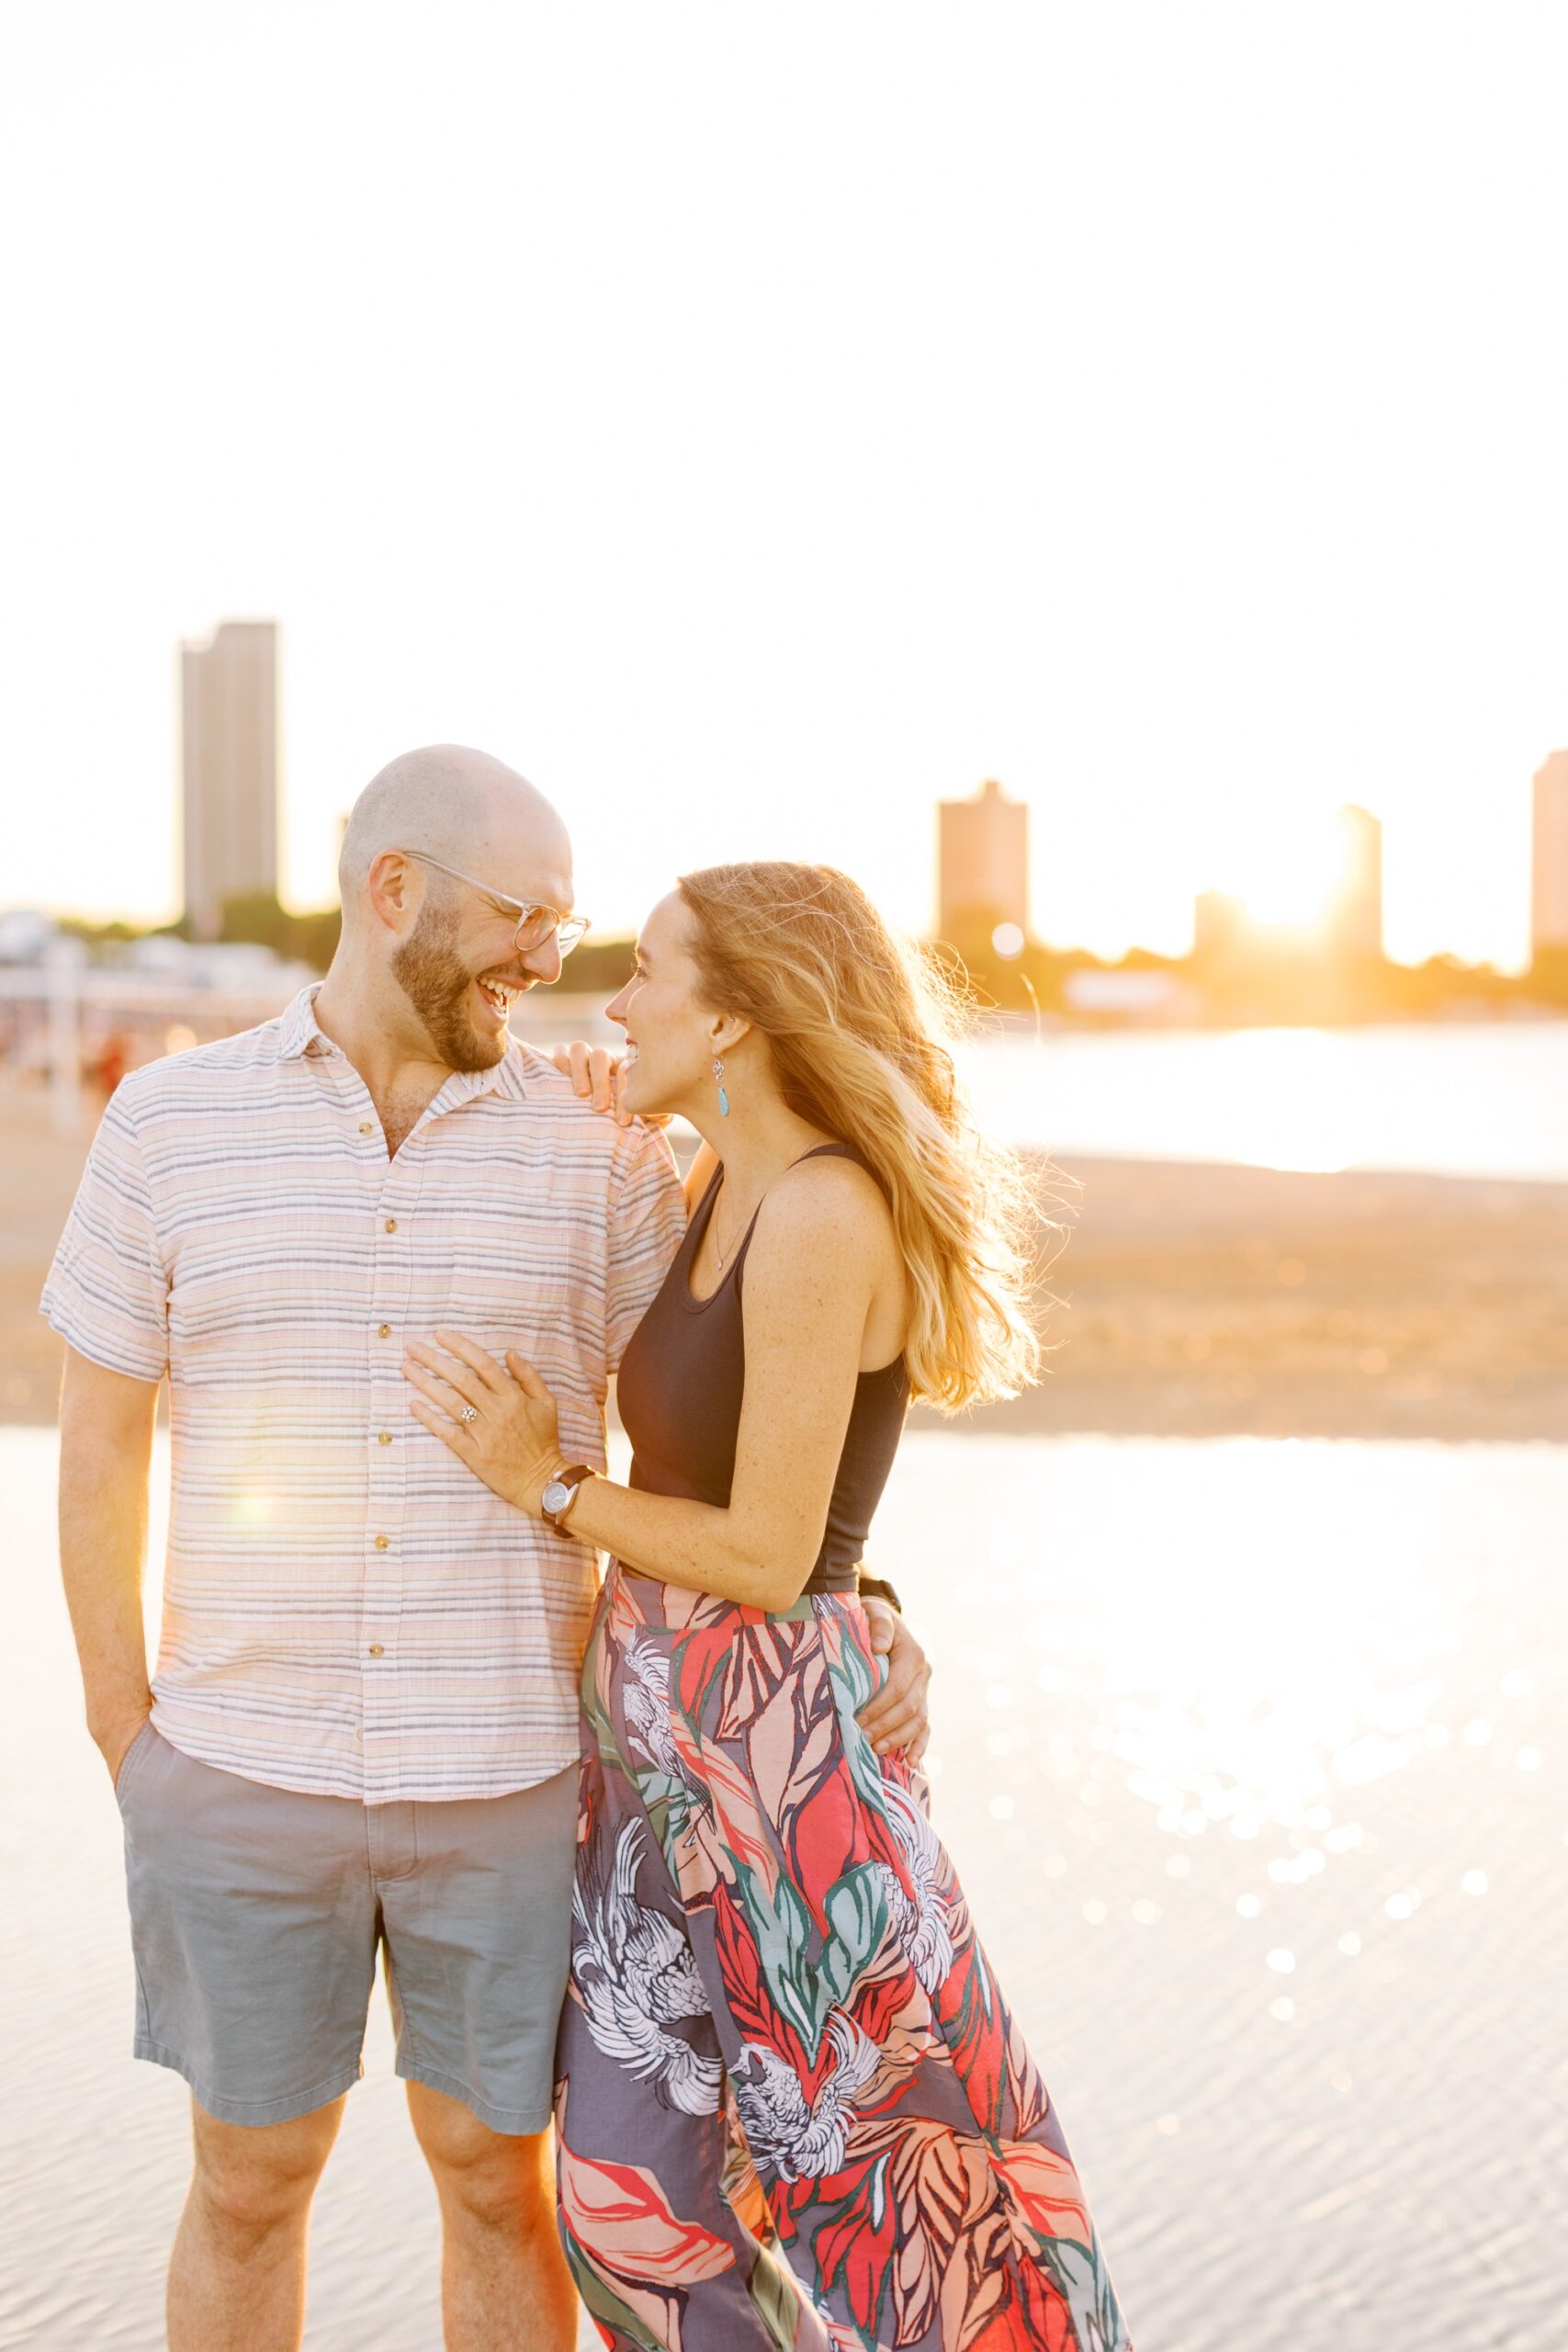 The couple smiled as the sun set behind the Chicago skyline